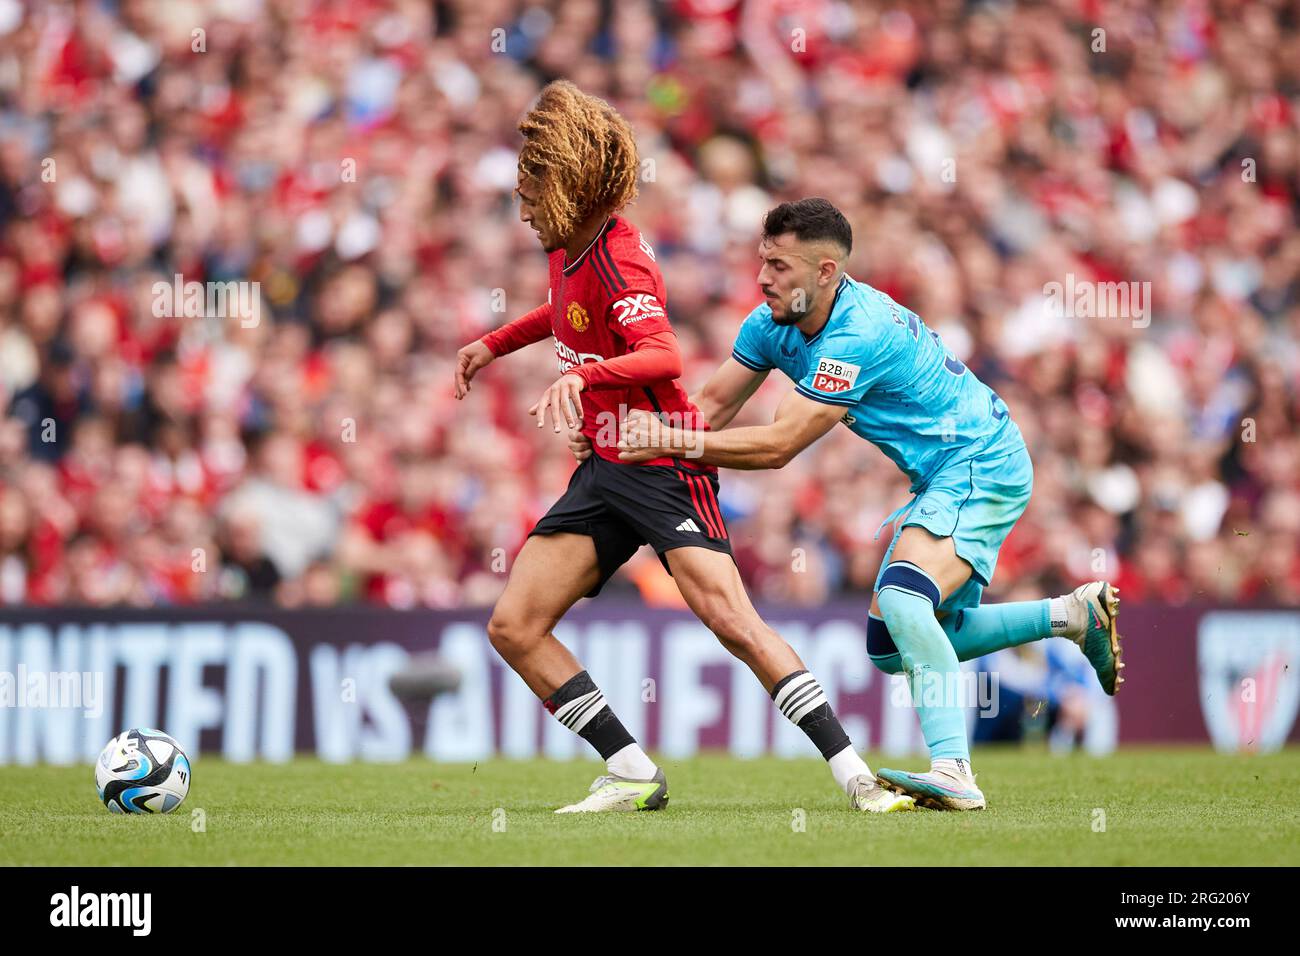 Dublin, Ireland, August 6, 2023, Hannibal Mejbri of Manchester United competes for the ball with Aitor Paredes of Athletic Club during the pre-season friendly football match between Manchester United and Athletic Club on August 6, 2023 at Aviva Stadium in Dublin, Ireland Stock Photo